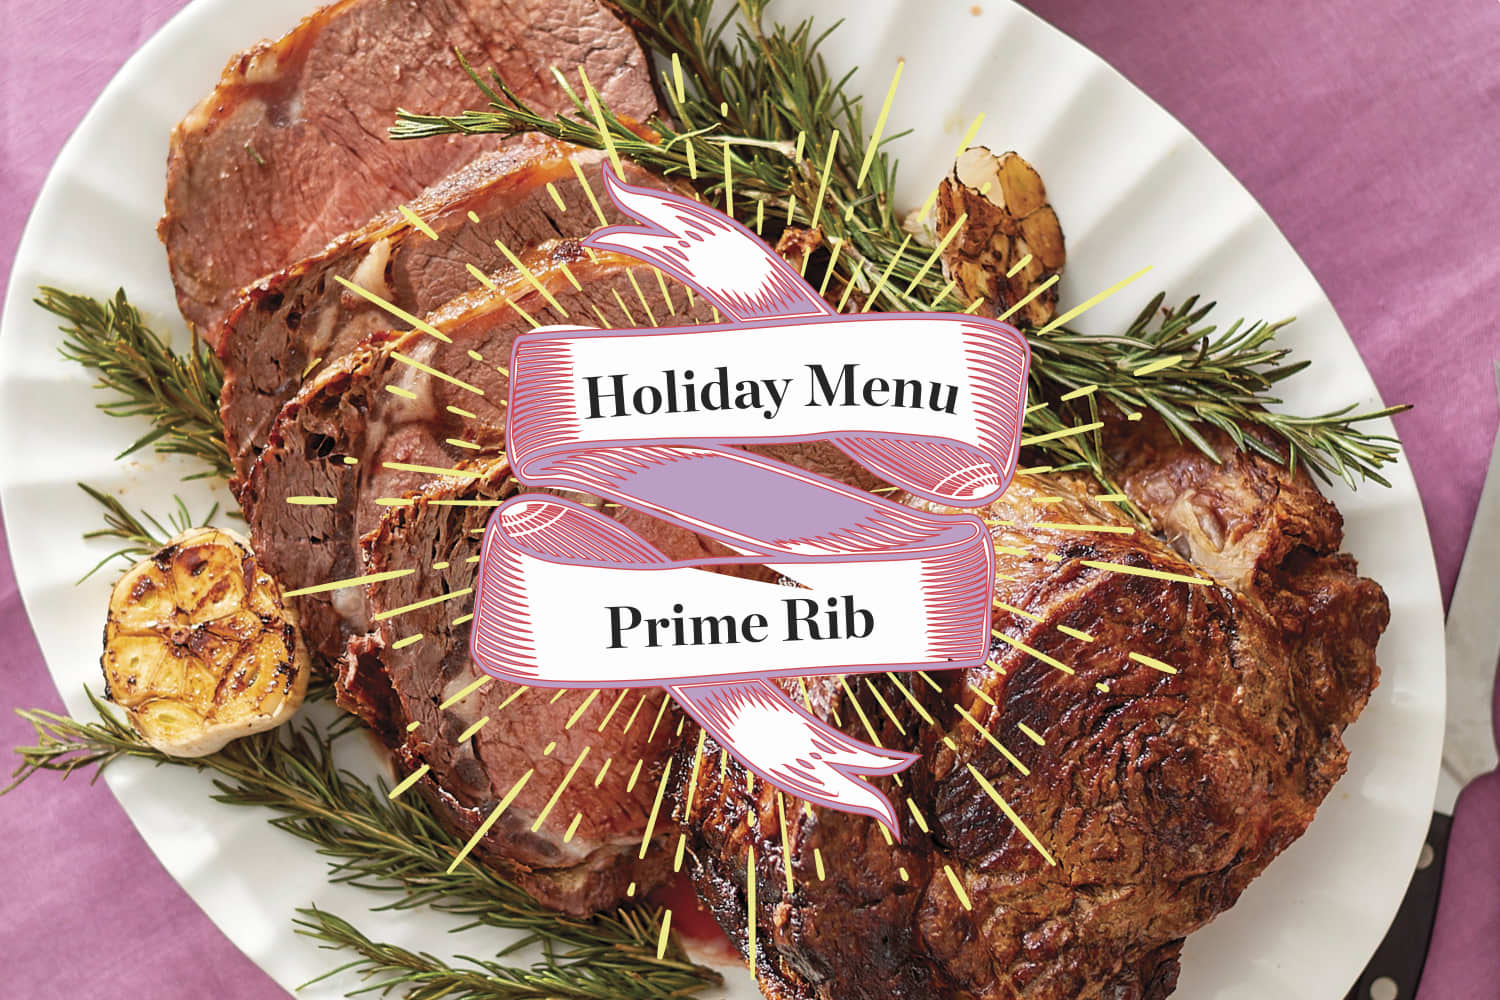 A Menu for a Prime Rib Holiday Dinner | Kitchn